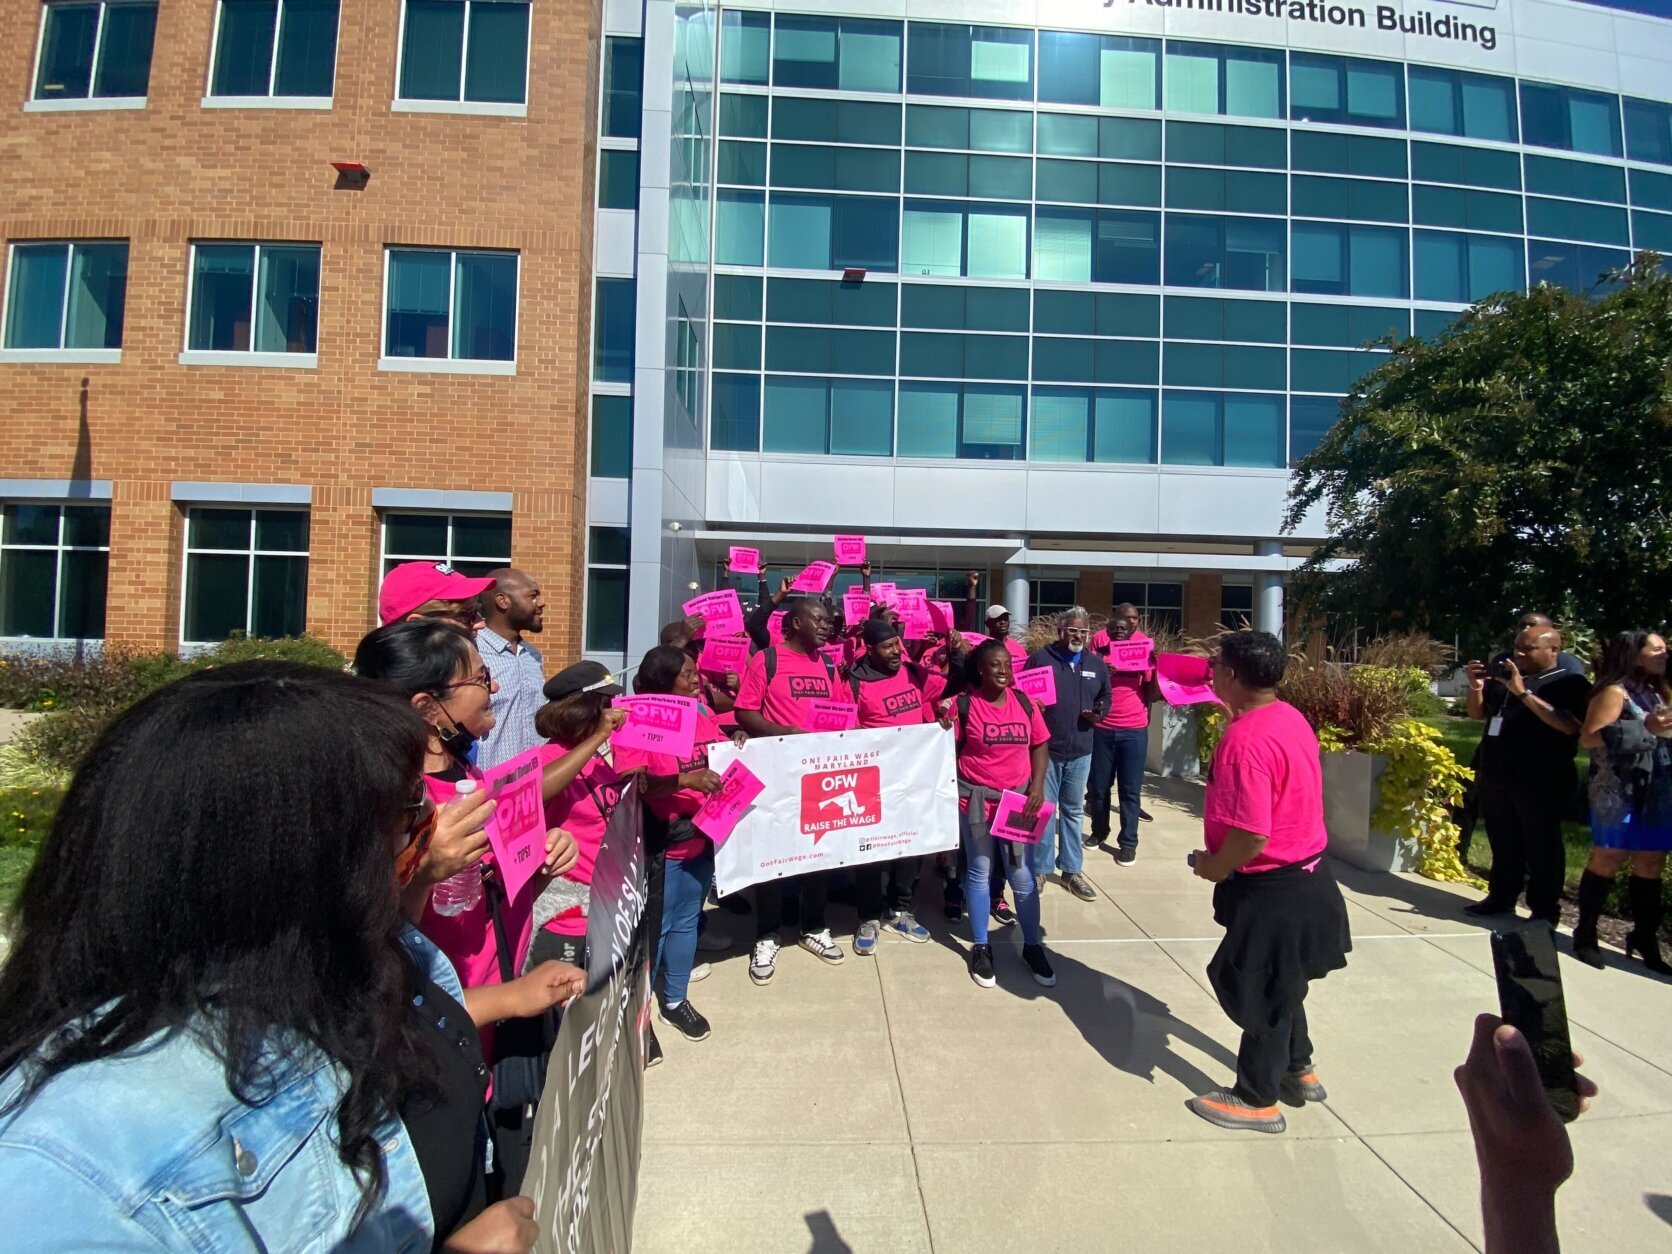 Those in favor of a minimum wage increase for tipped workers in Prince George's County hold a rally on Thursday, wearing pink in solidarity.